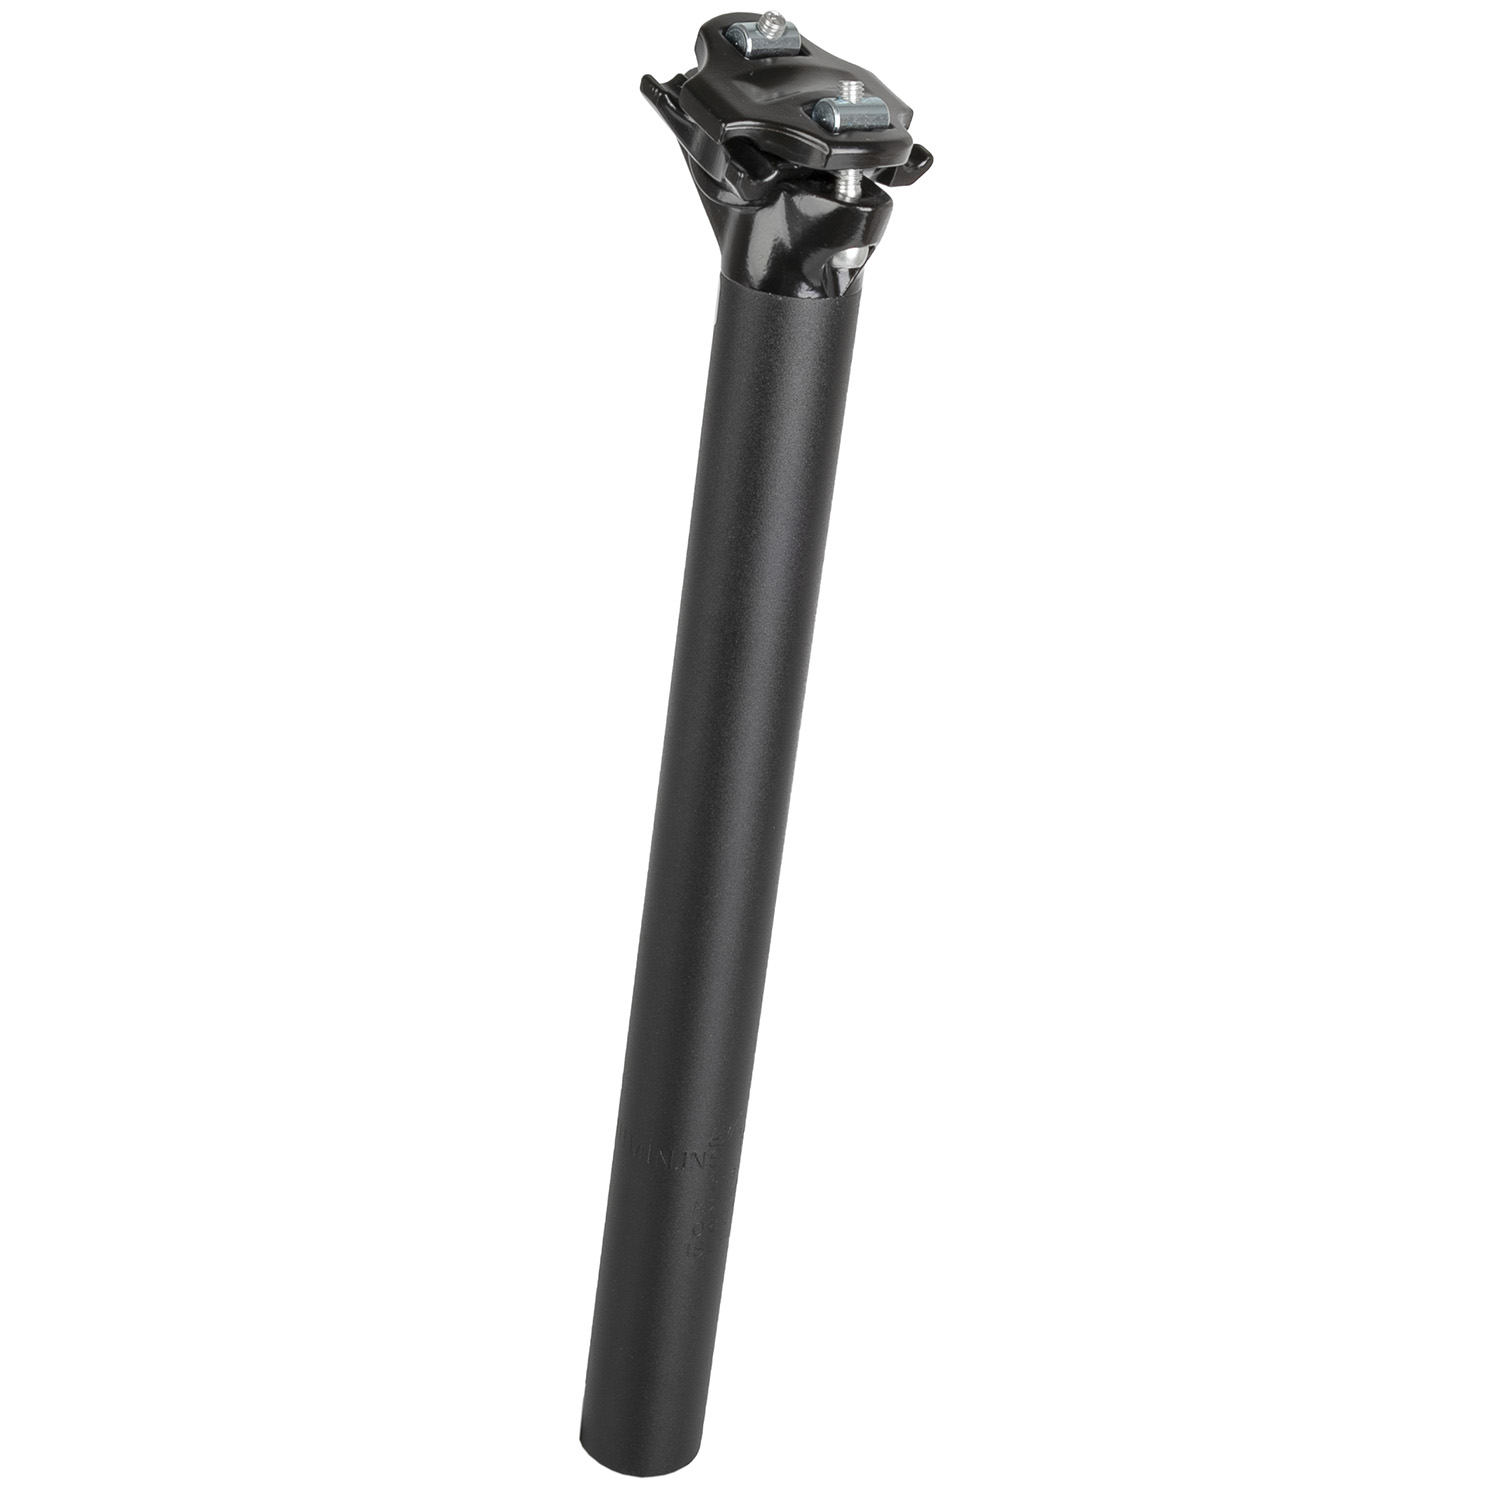 M-WAVE SP-M4.1 seat post – AVAILABLE IN SELECTED BIKE SHOPS